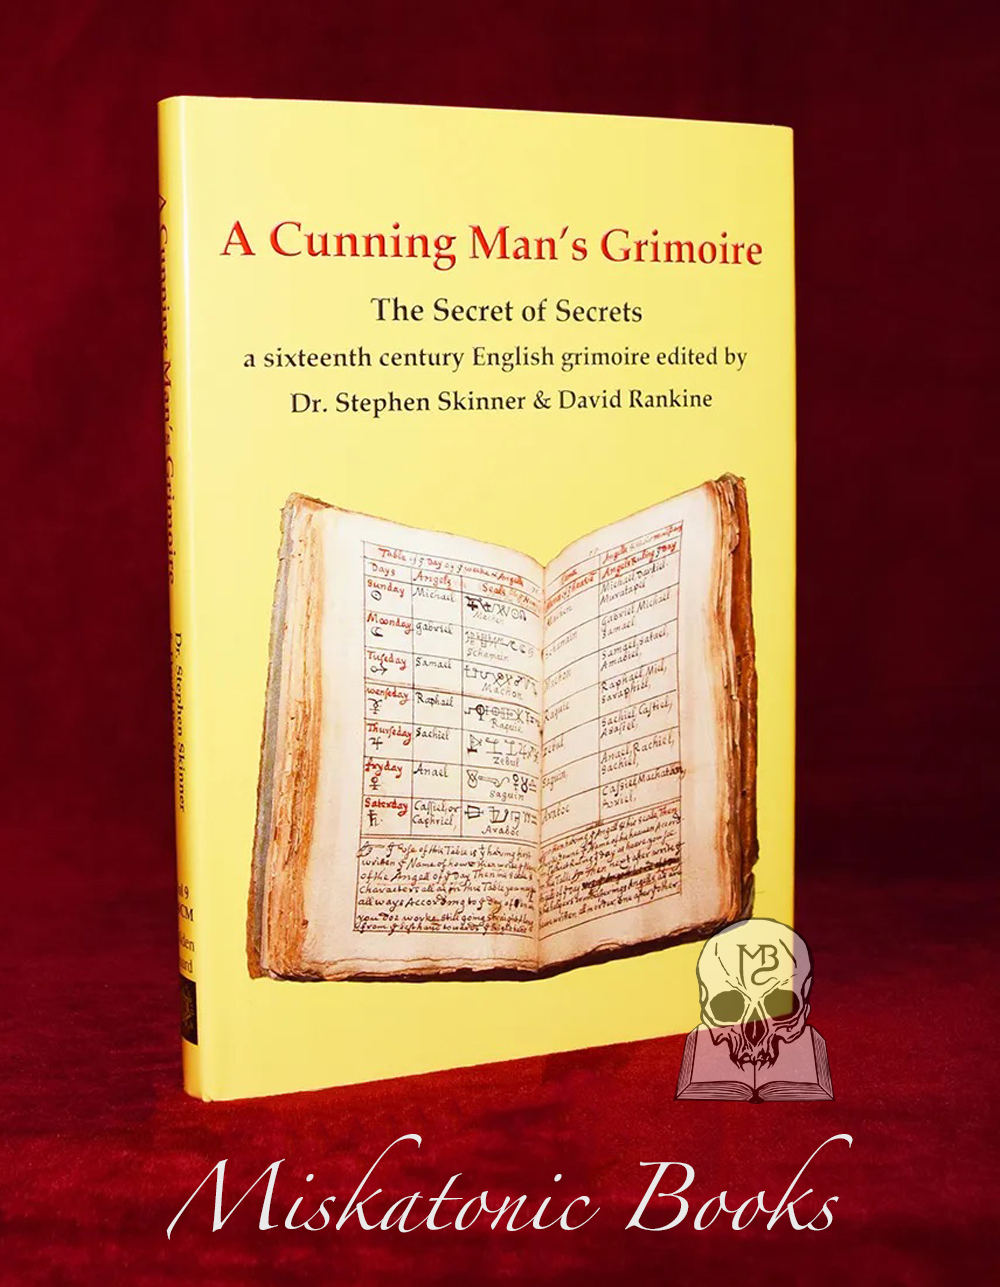 A CUNNING MAN'S GRIMOIRE by Dr. Stephen Skinner & David Rankine (First Edition Hardcover)